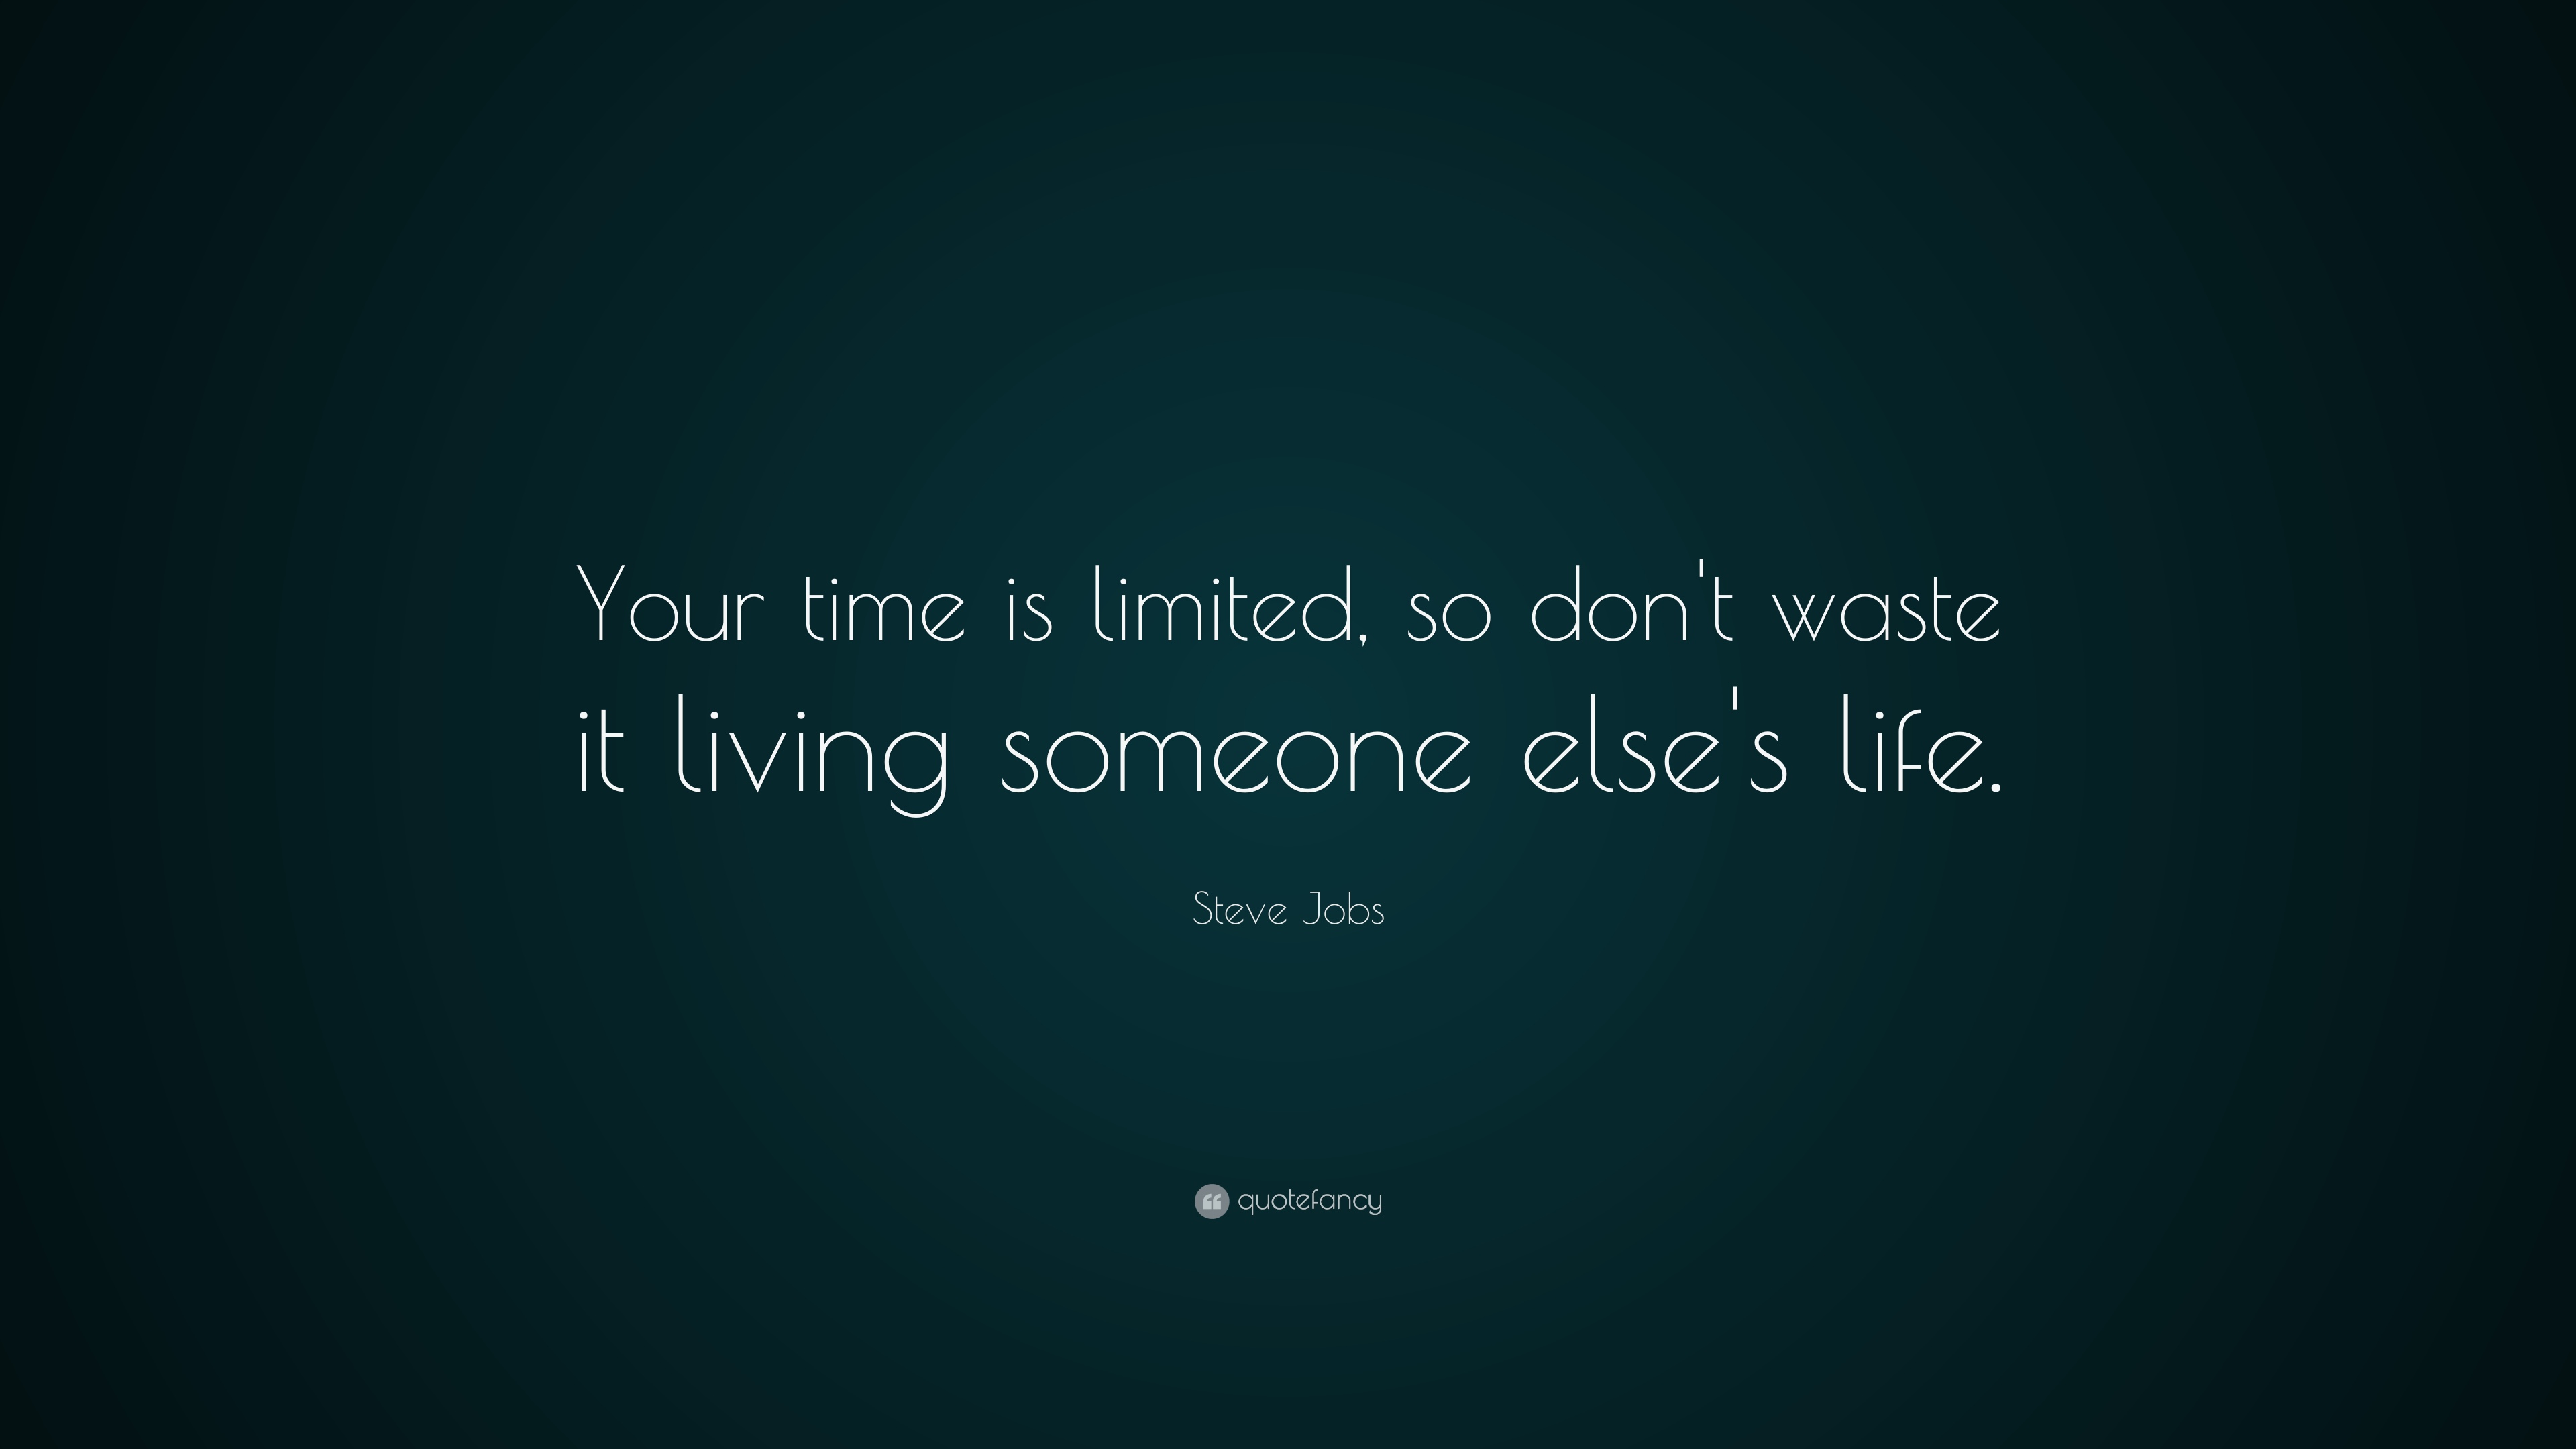 Steve Jobs Quote: “Your time is limited, so don't waste it living someone else's life.”